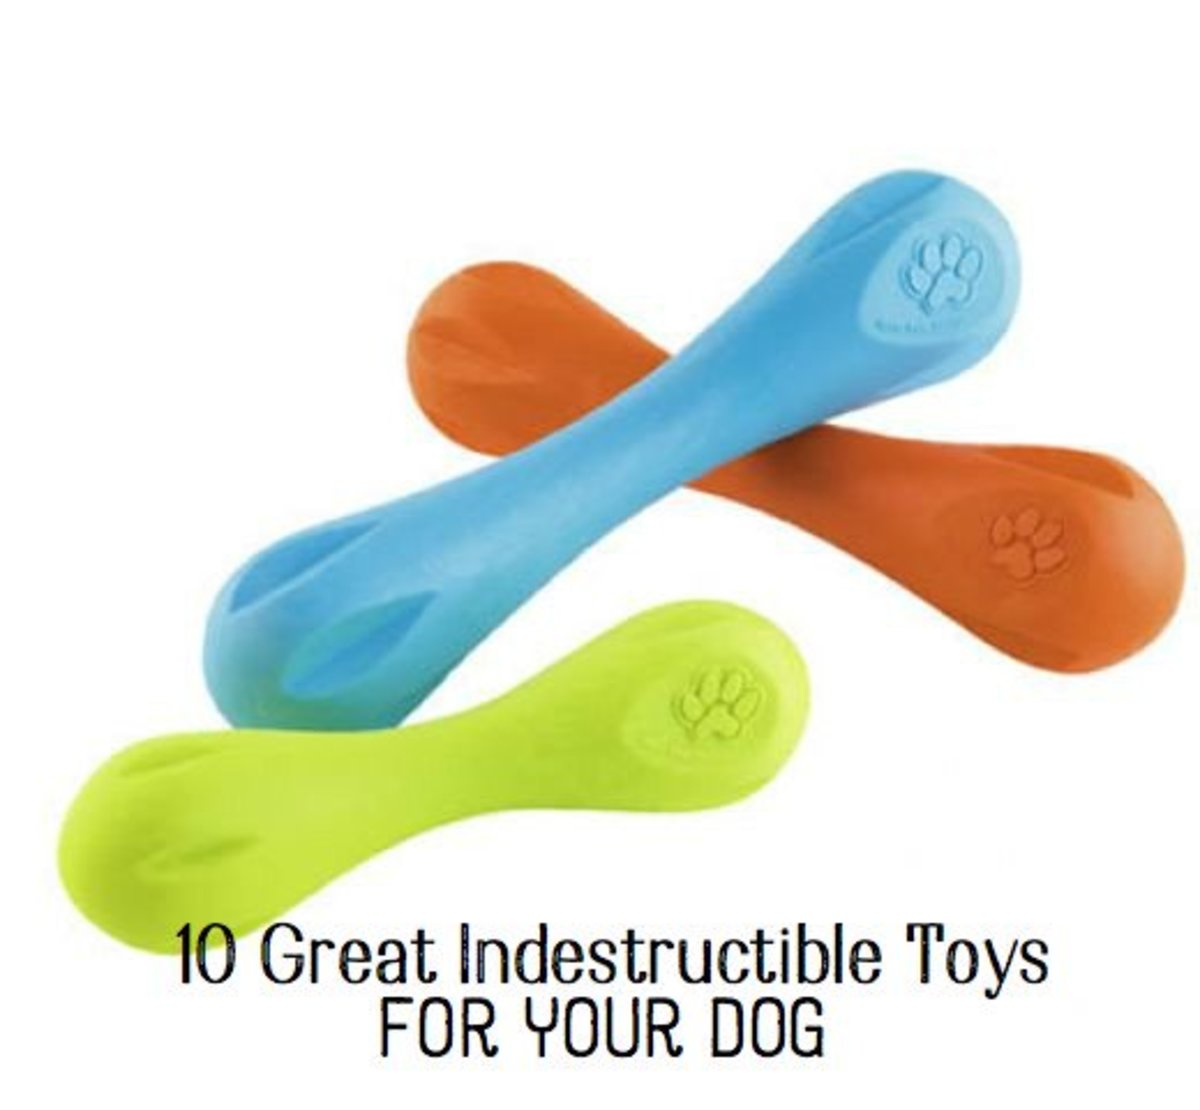 10-most-indestructible-dog-toys-for-your-active-pooch